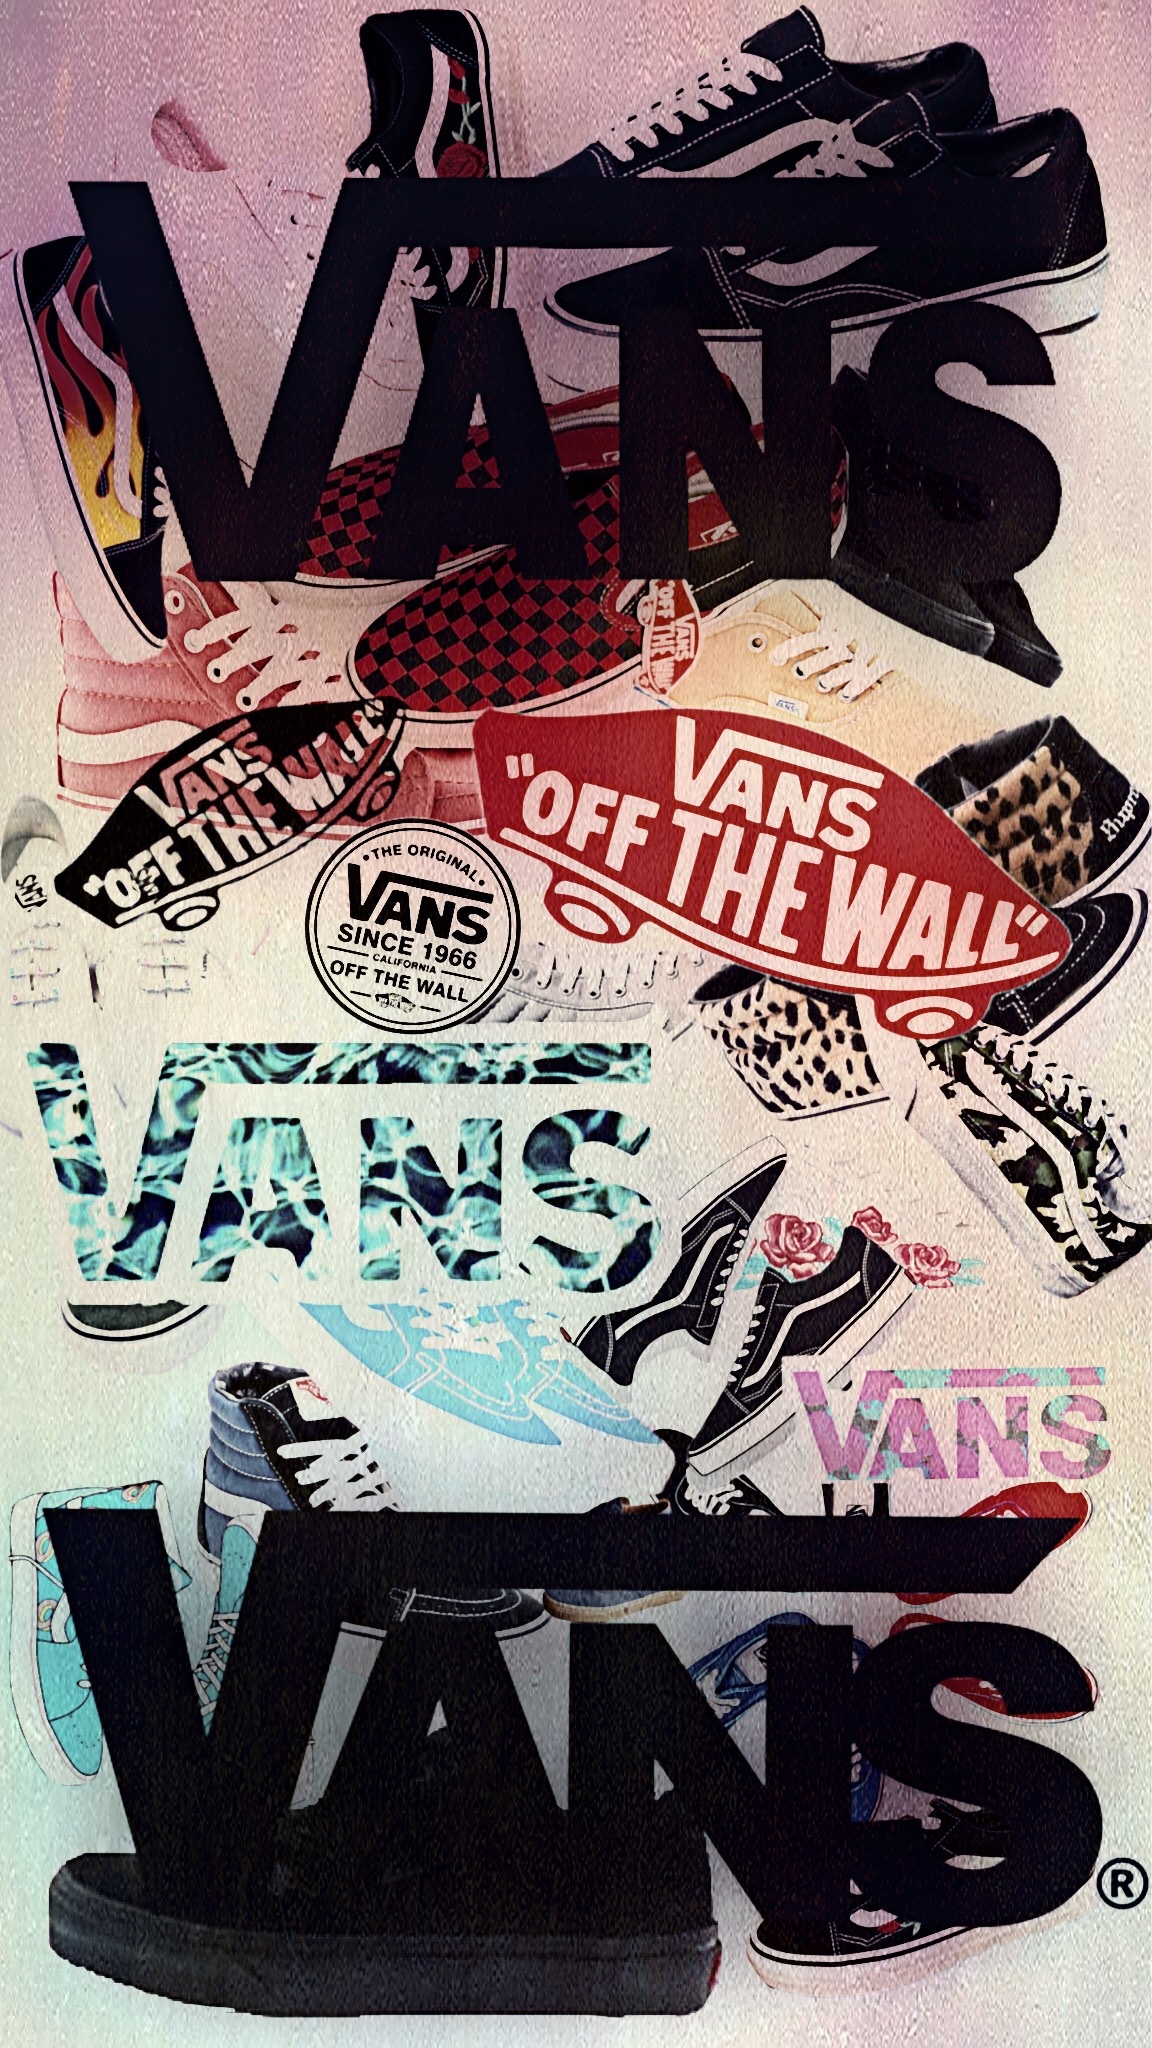 Vans: A brand rooted in the 1960s skate culture, Poster. 1160x2050 HD Wallpaper.